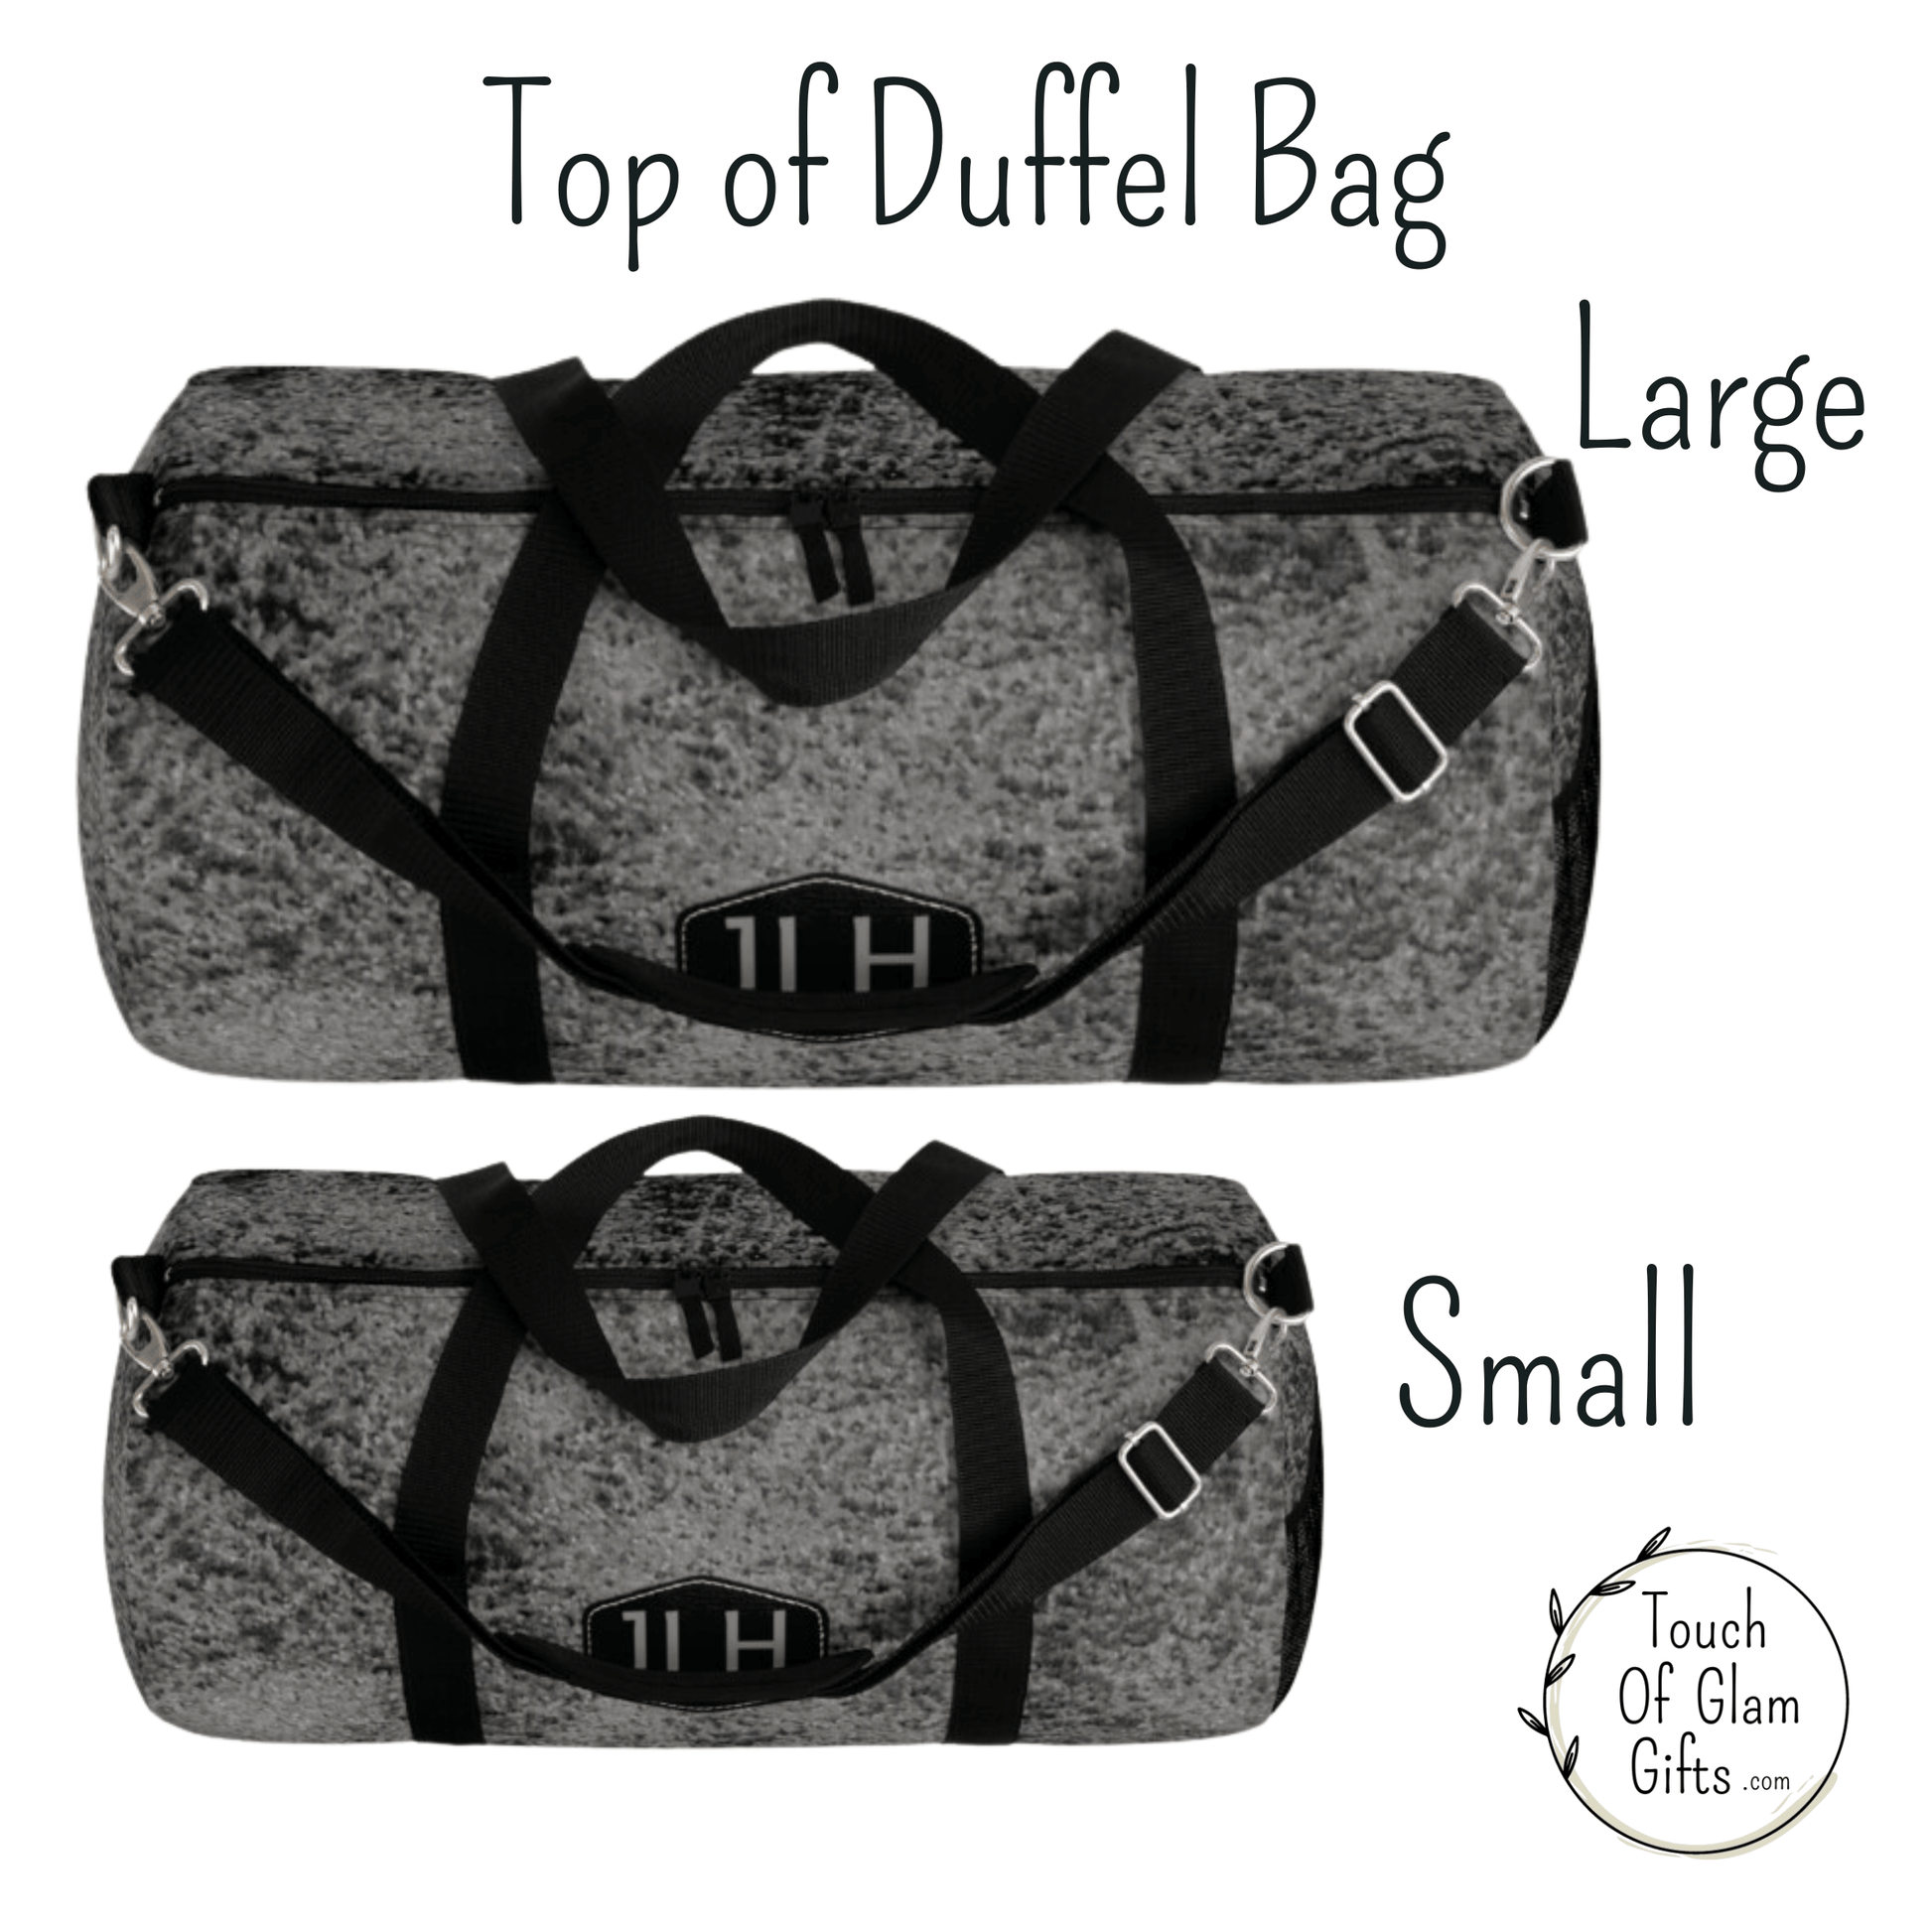 This weekend bag for guys shows the double head zipper that is quality, the adjustable shoulder strap in both the large weekend bag and small duffel bag.